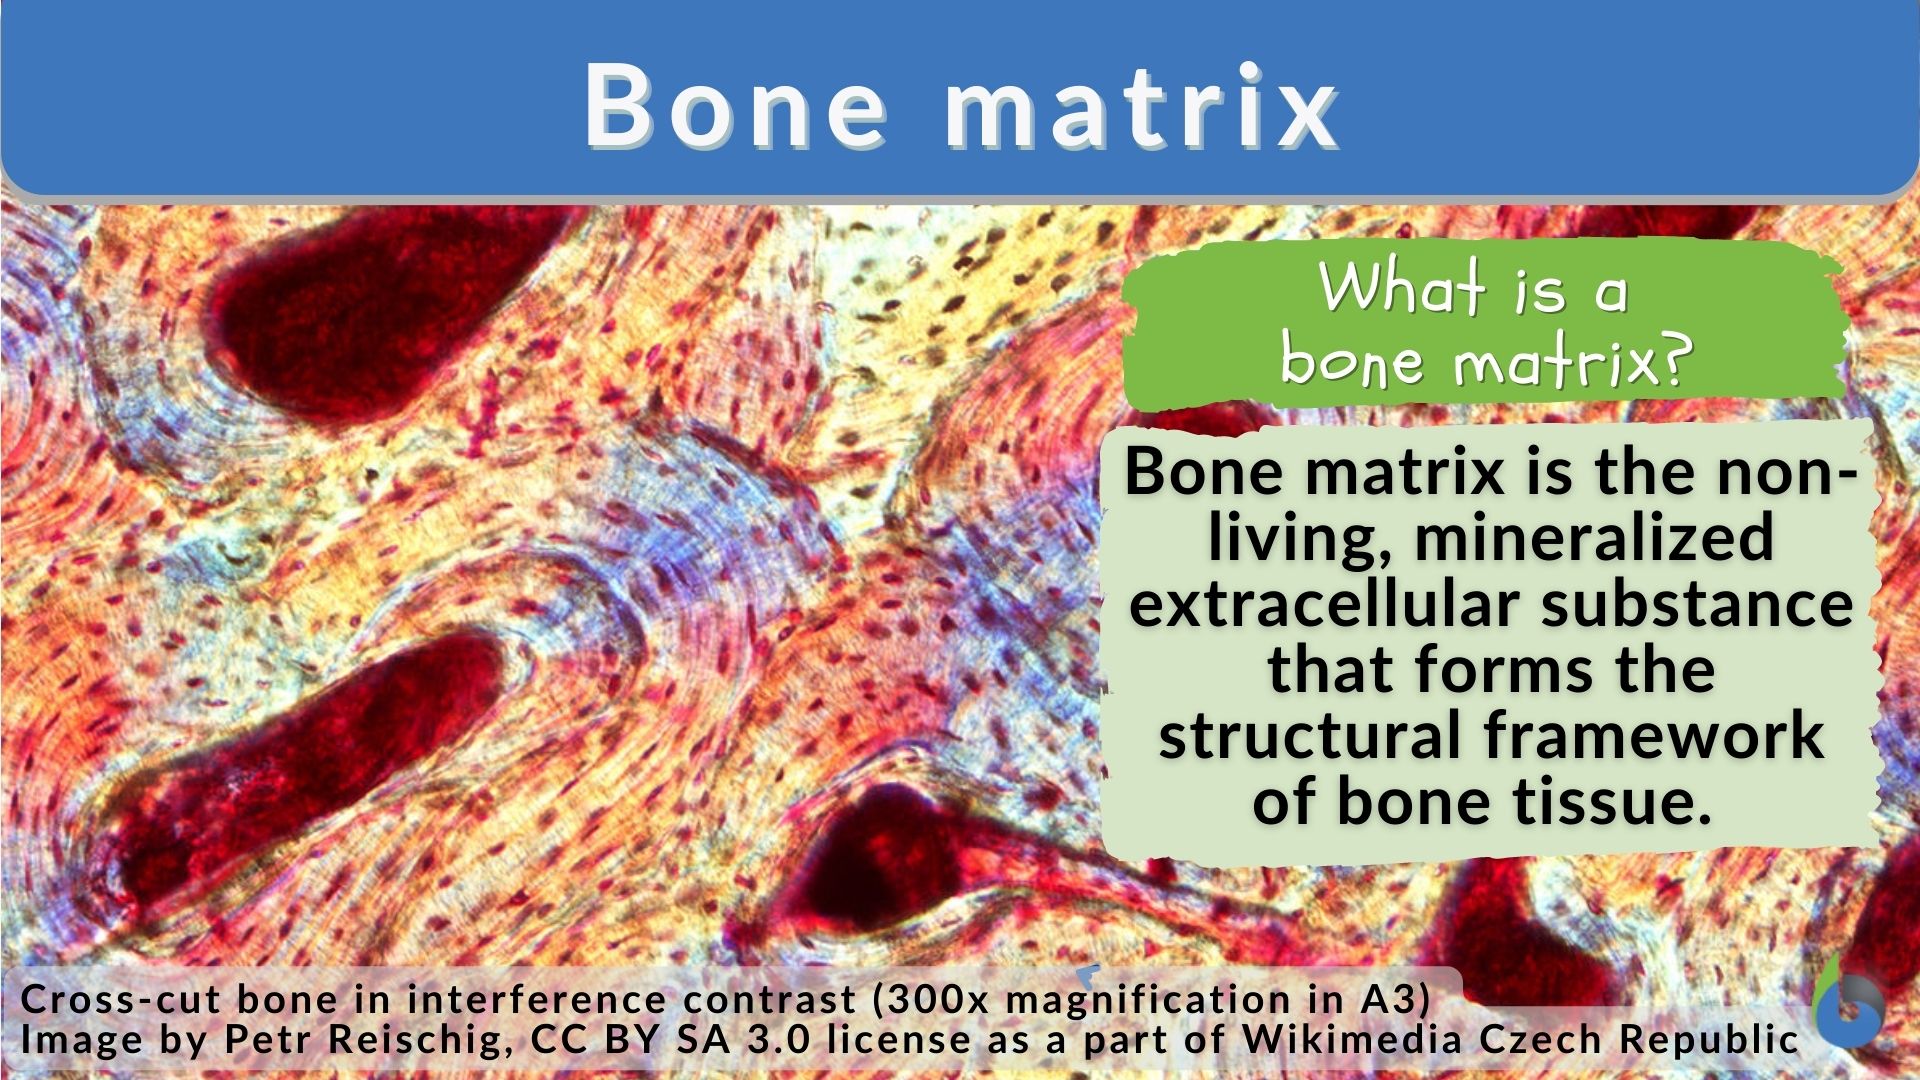 The soft tissue inside some of the bones is called what?